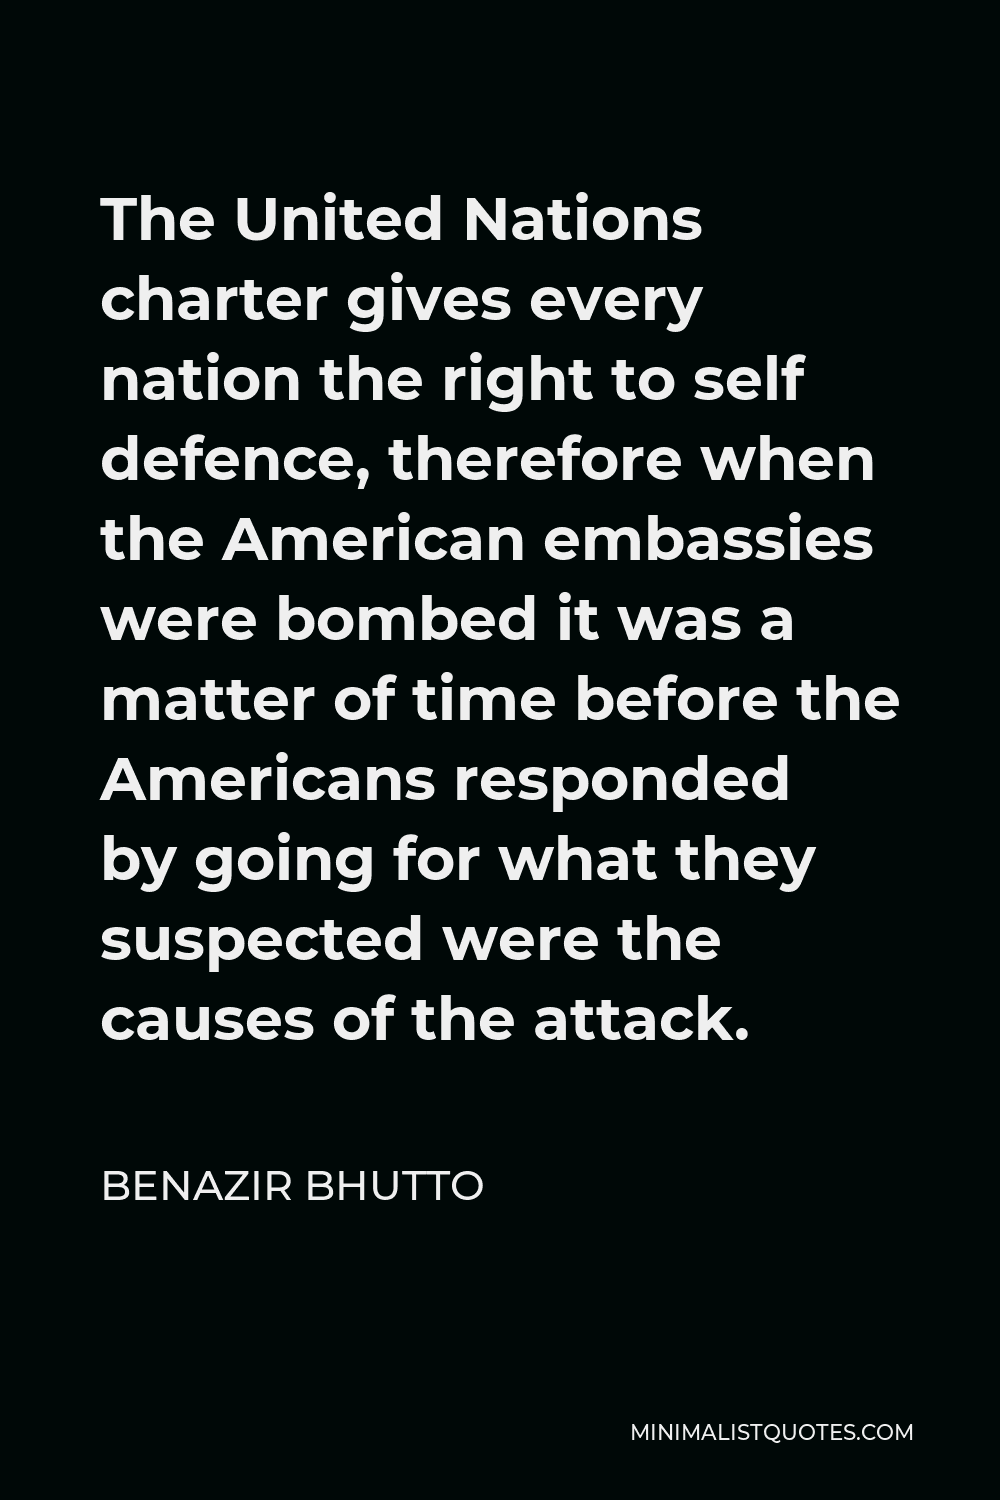 Benazir Bhutto Quote - The United Nations charter gives every nation the right to self defence, therefore when the American embassies were bombed it was a matter of time before the Americans responded by going for what they suspected were the causes of the attack.